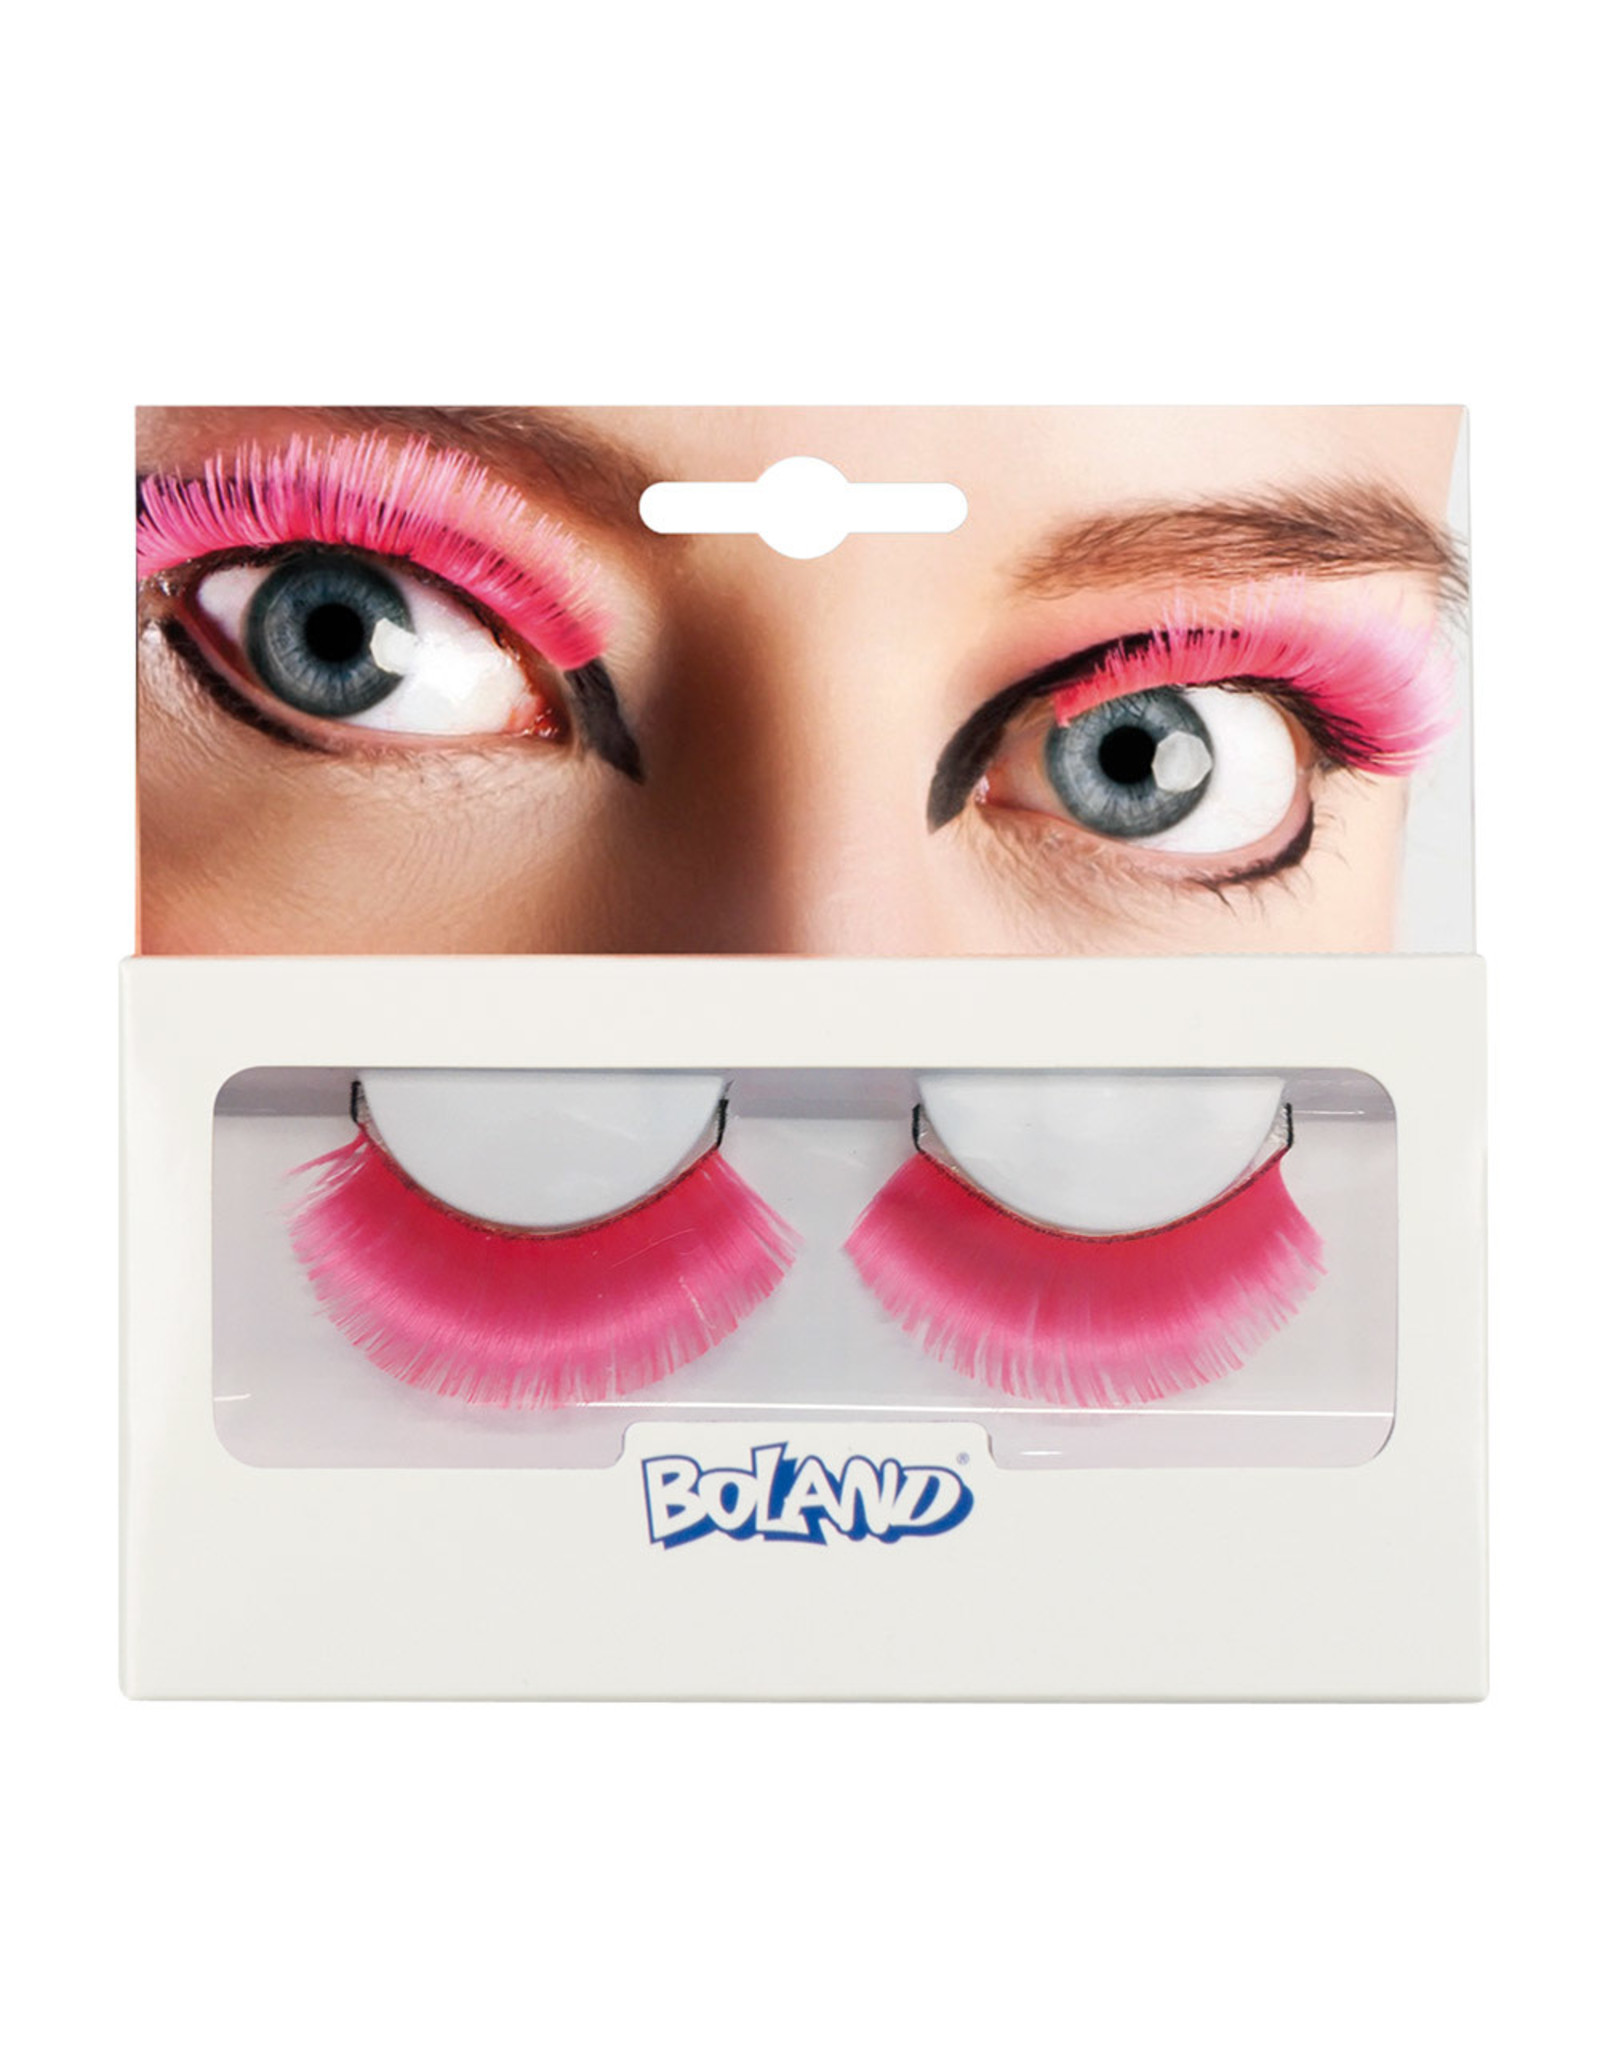 Boland wimpers neonroze 1 set